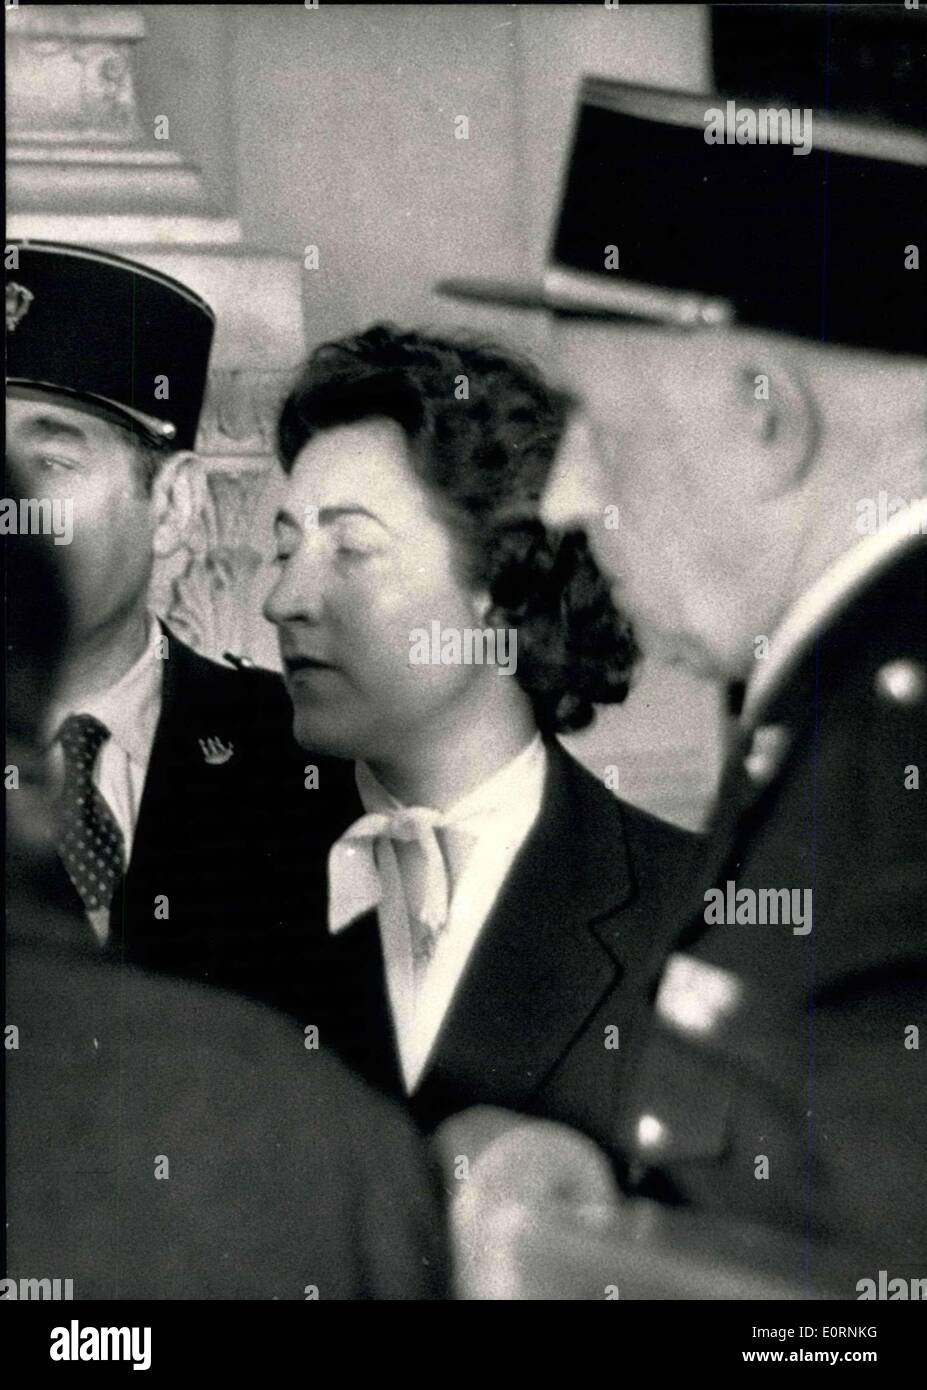 Mar. 28, 1960 - Biggest Murder Trail of year Opens in Paris:The Trial of Georges Rapin, Alias M. Bill, Opened in the Paris Assizes today. Photo Shows MME Adam, Widow of the Owner of a Petrol Station who was Murdered by Rapin, Arriving at the Law Courts. Stock Photo